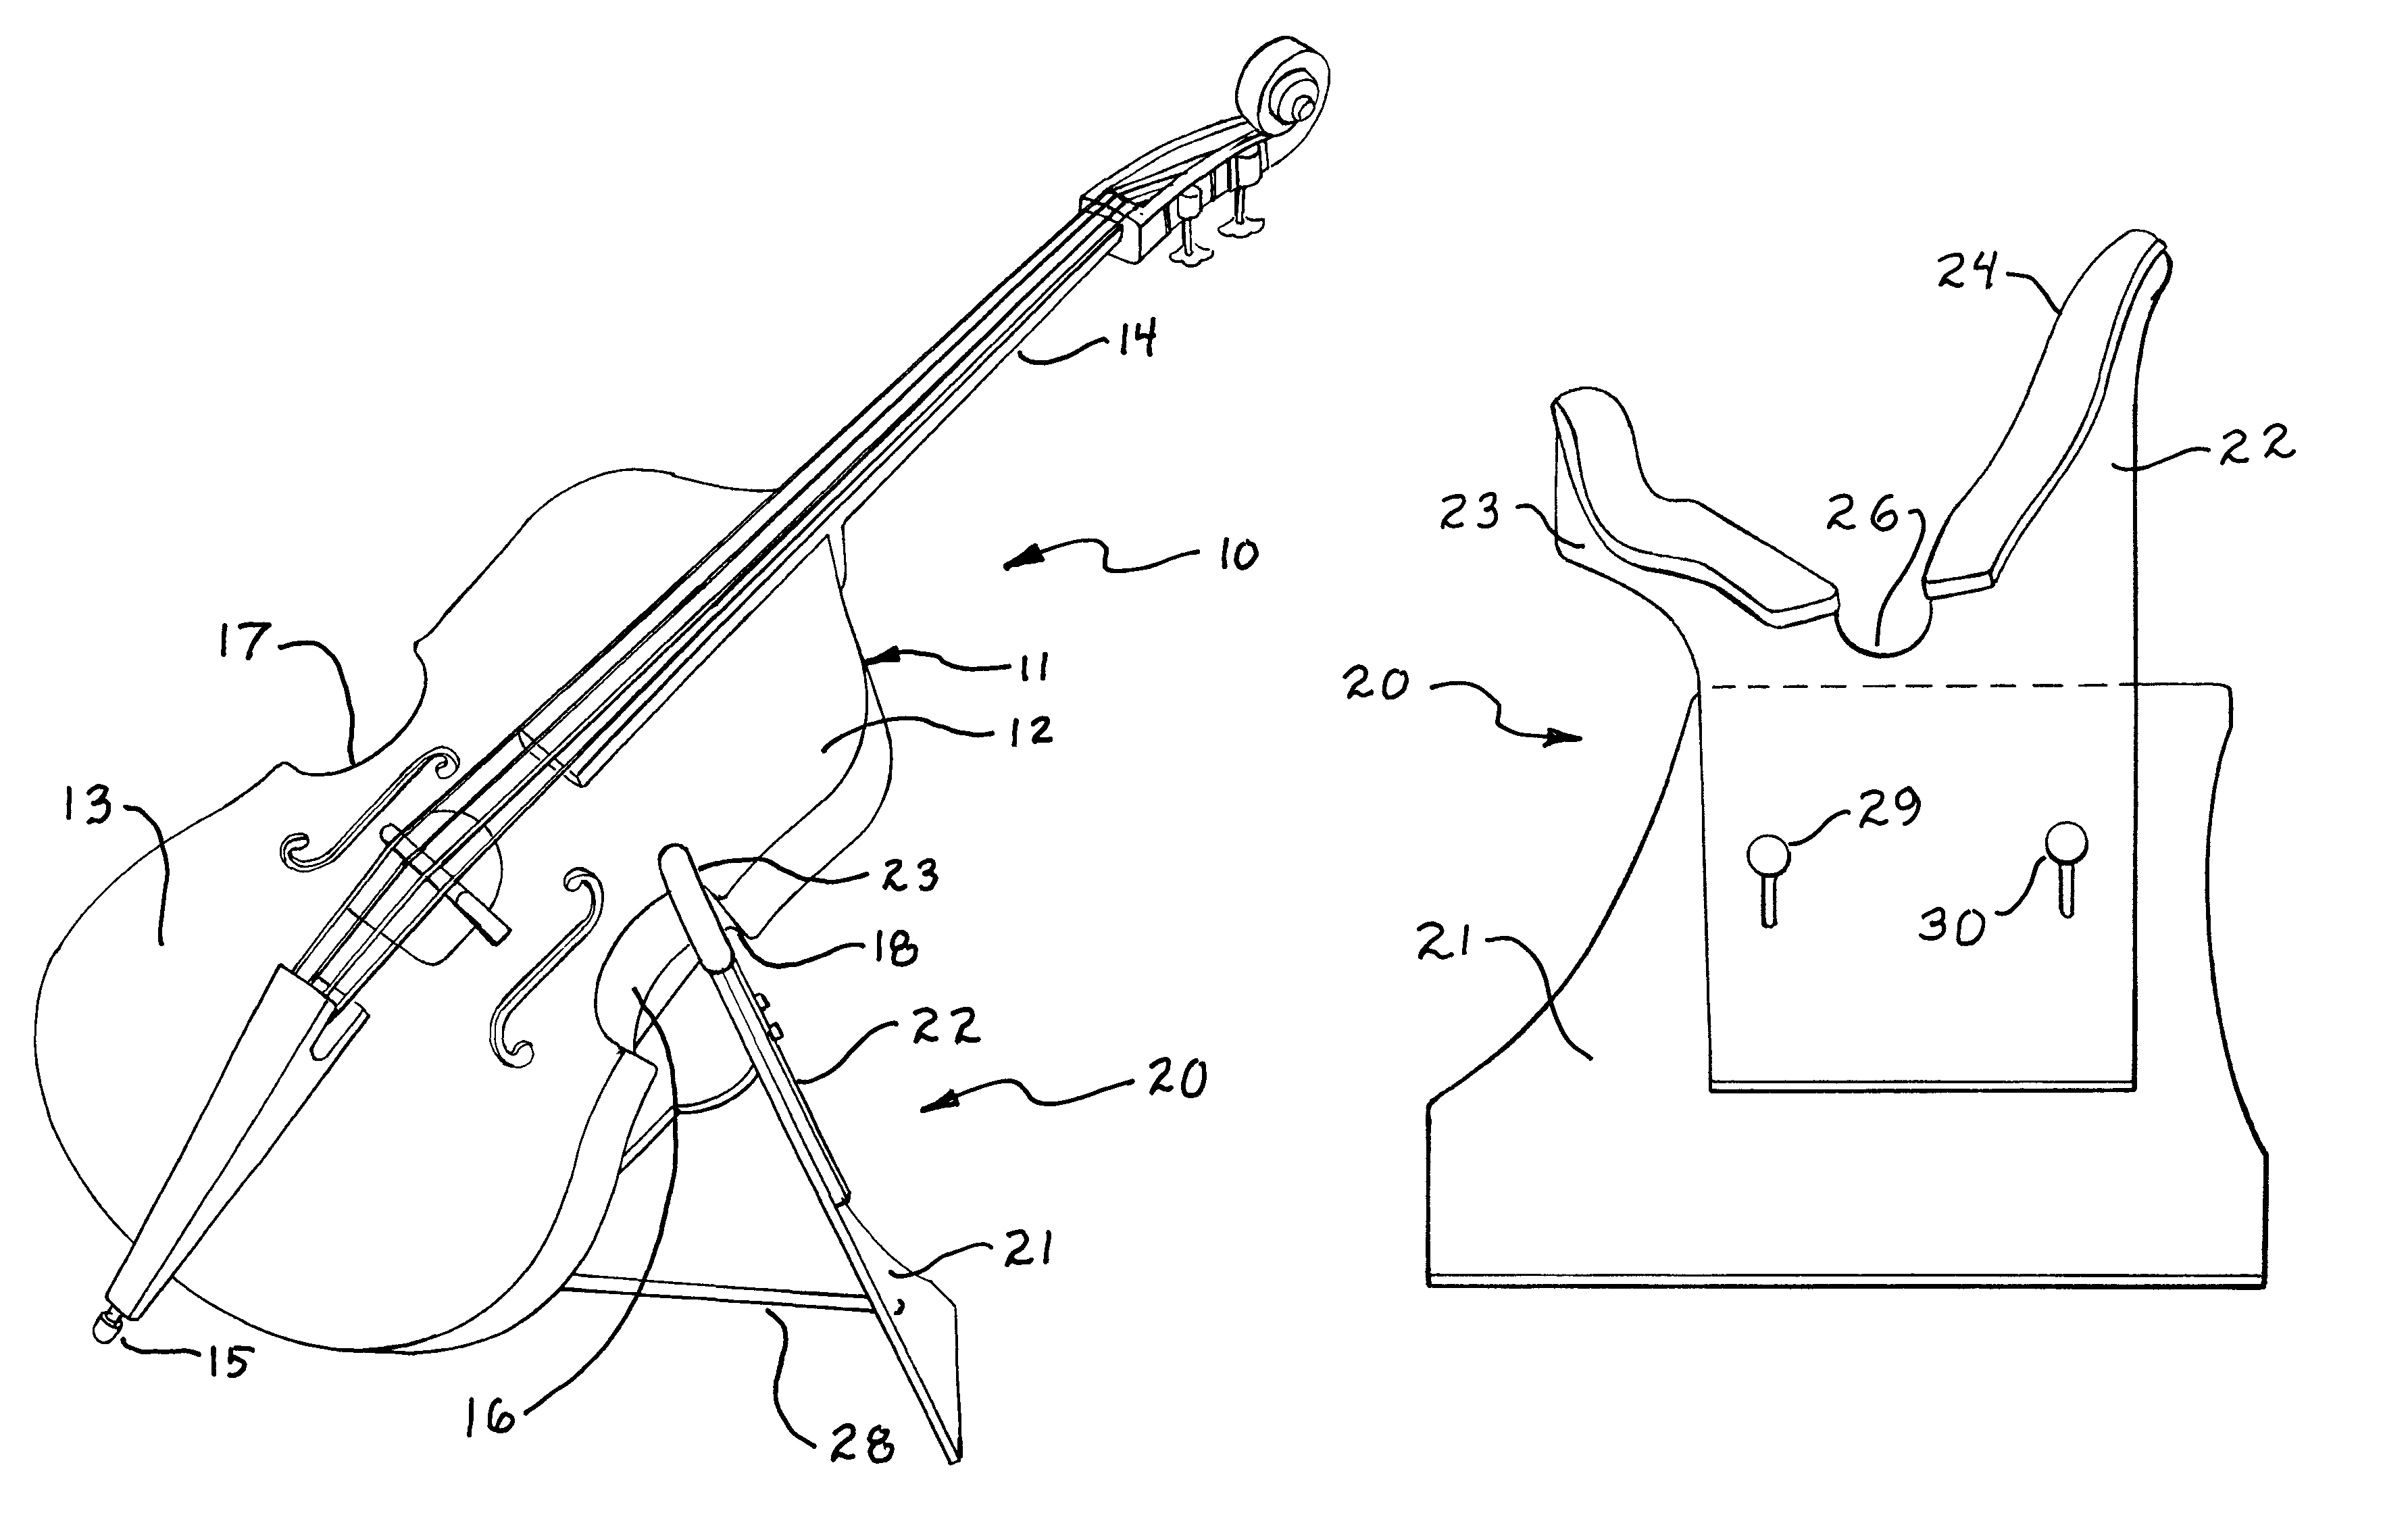 Stand and cradle for double bass and cello